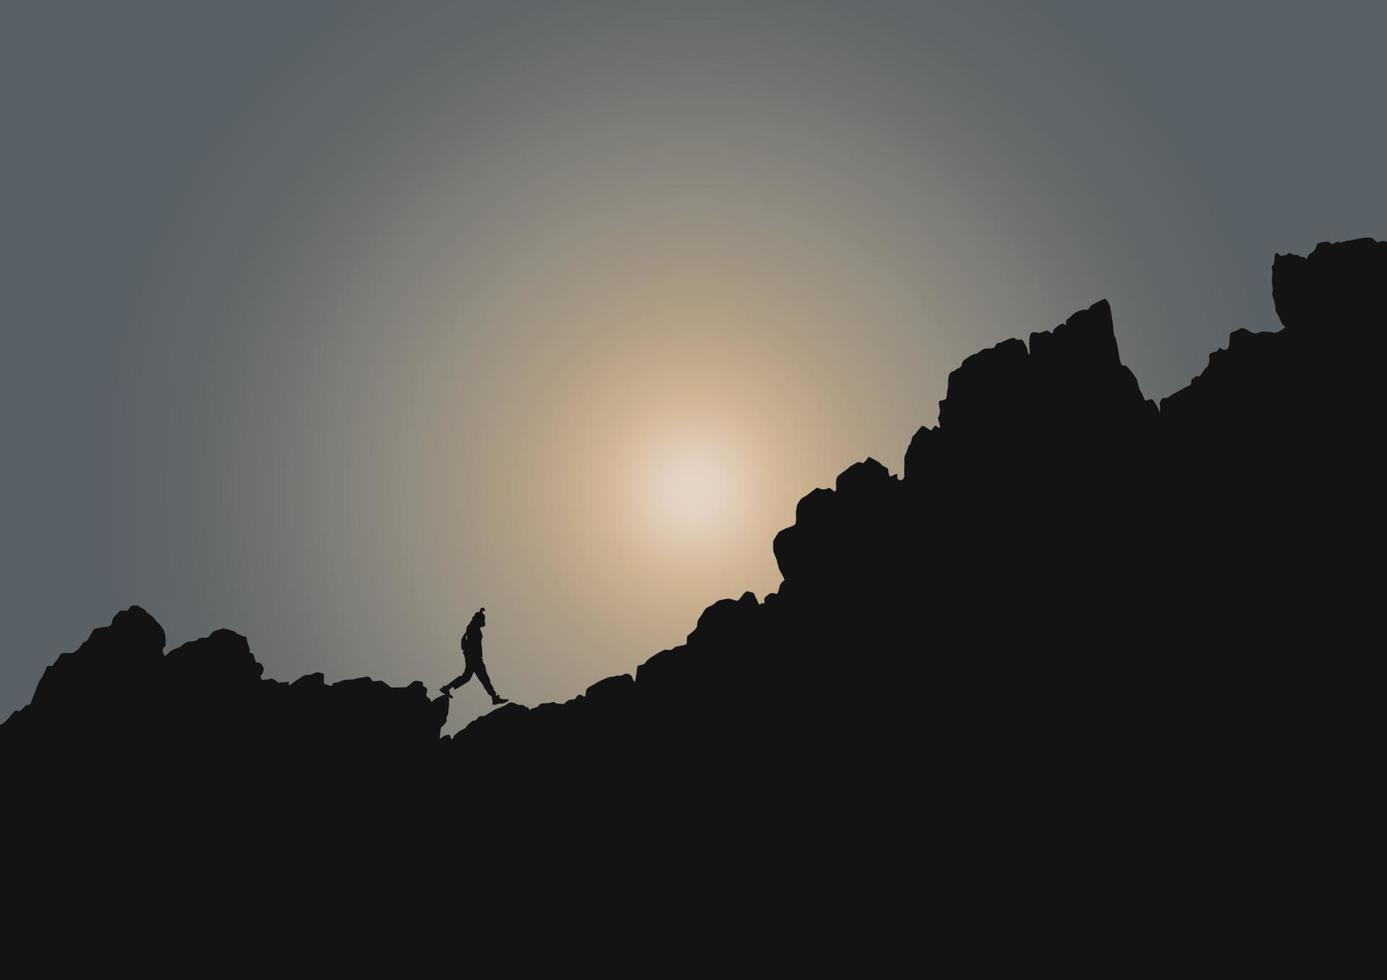 silhouette of a person on the top of the mountain, vector illustration.